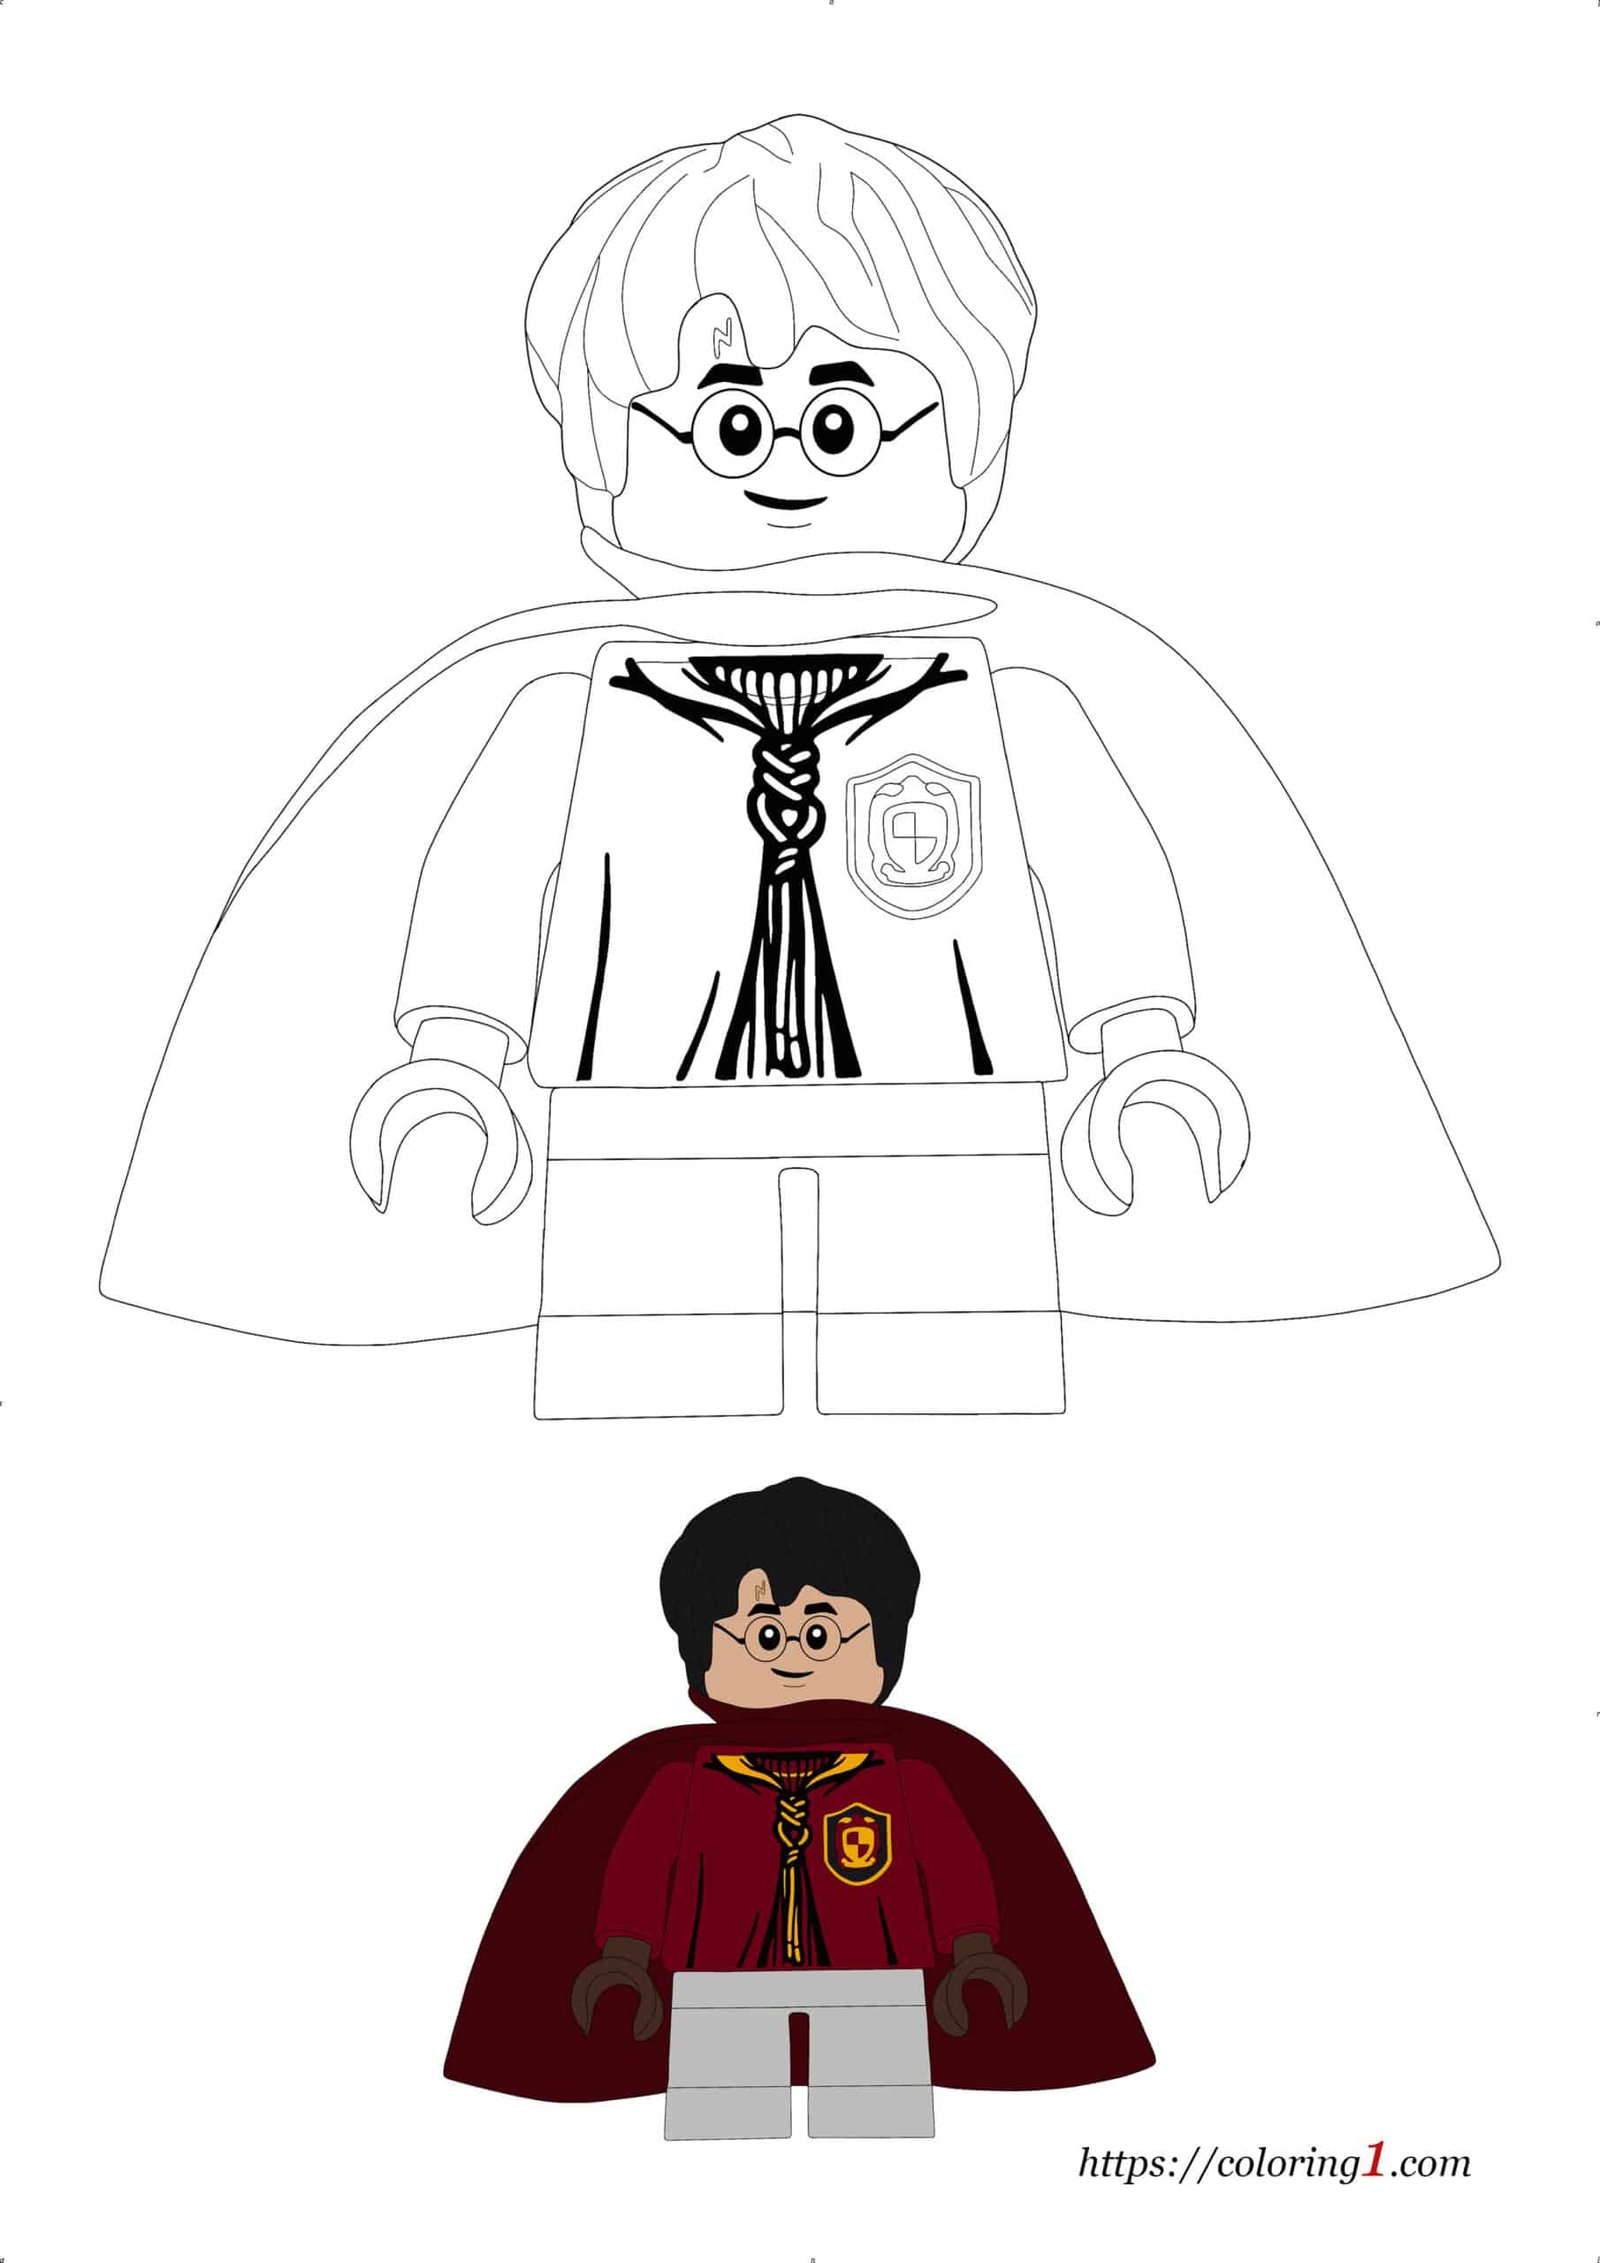 Lego Harry Potter free printable coloring page